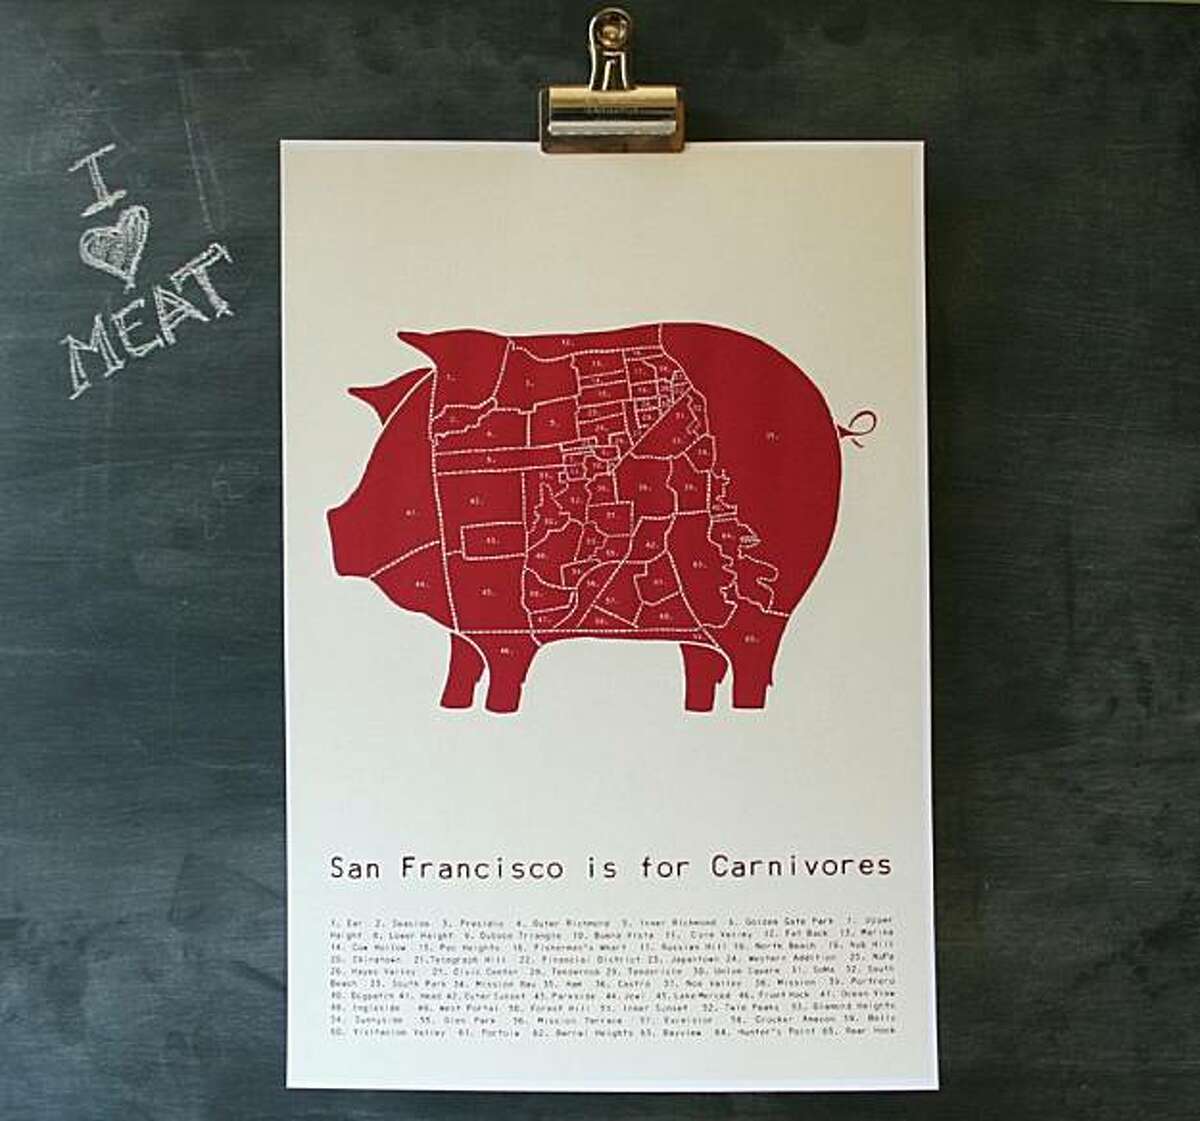 "San Francisco is for Carnivores" by Alyson Thomas of Drywell Art.